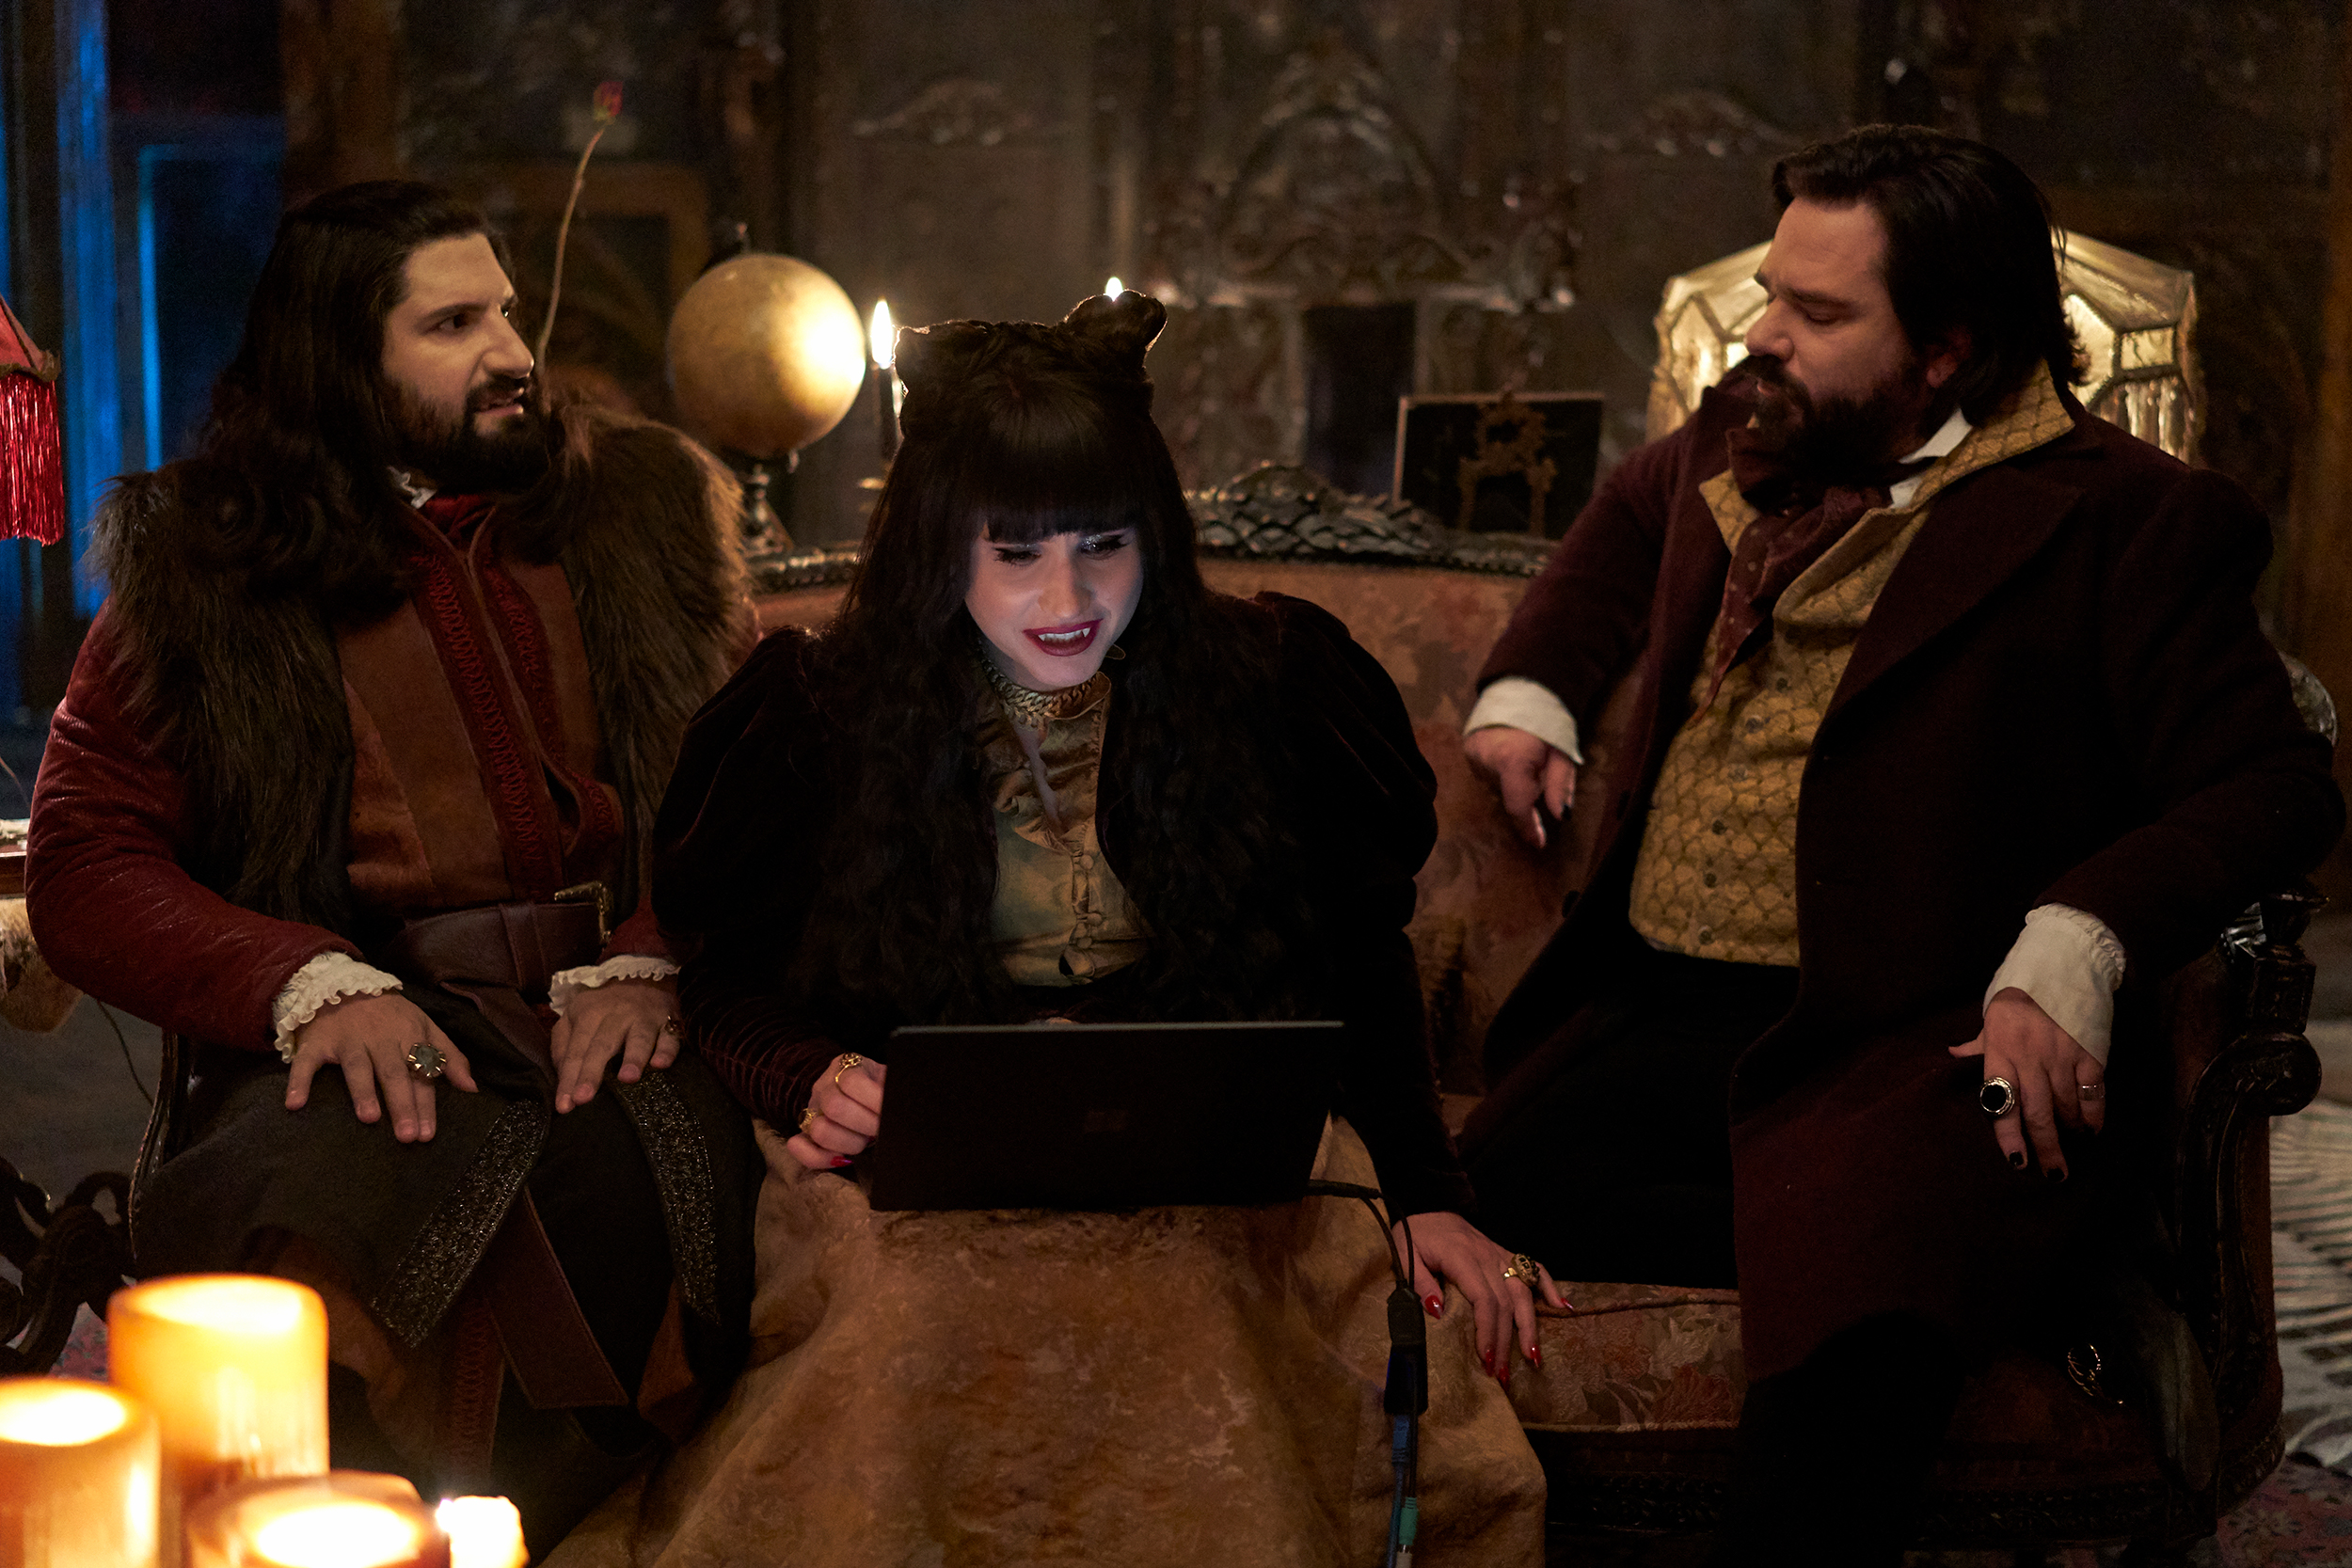 What We Do in the Shadows' Season 3: Making of FX Comedy Series